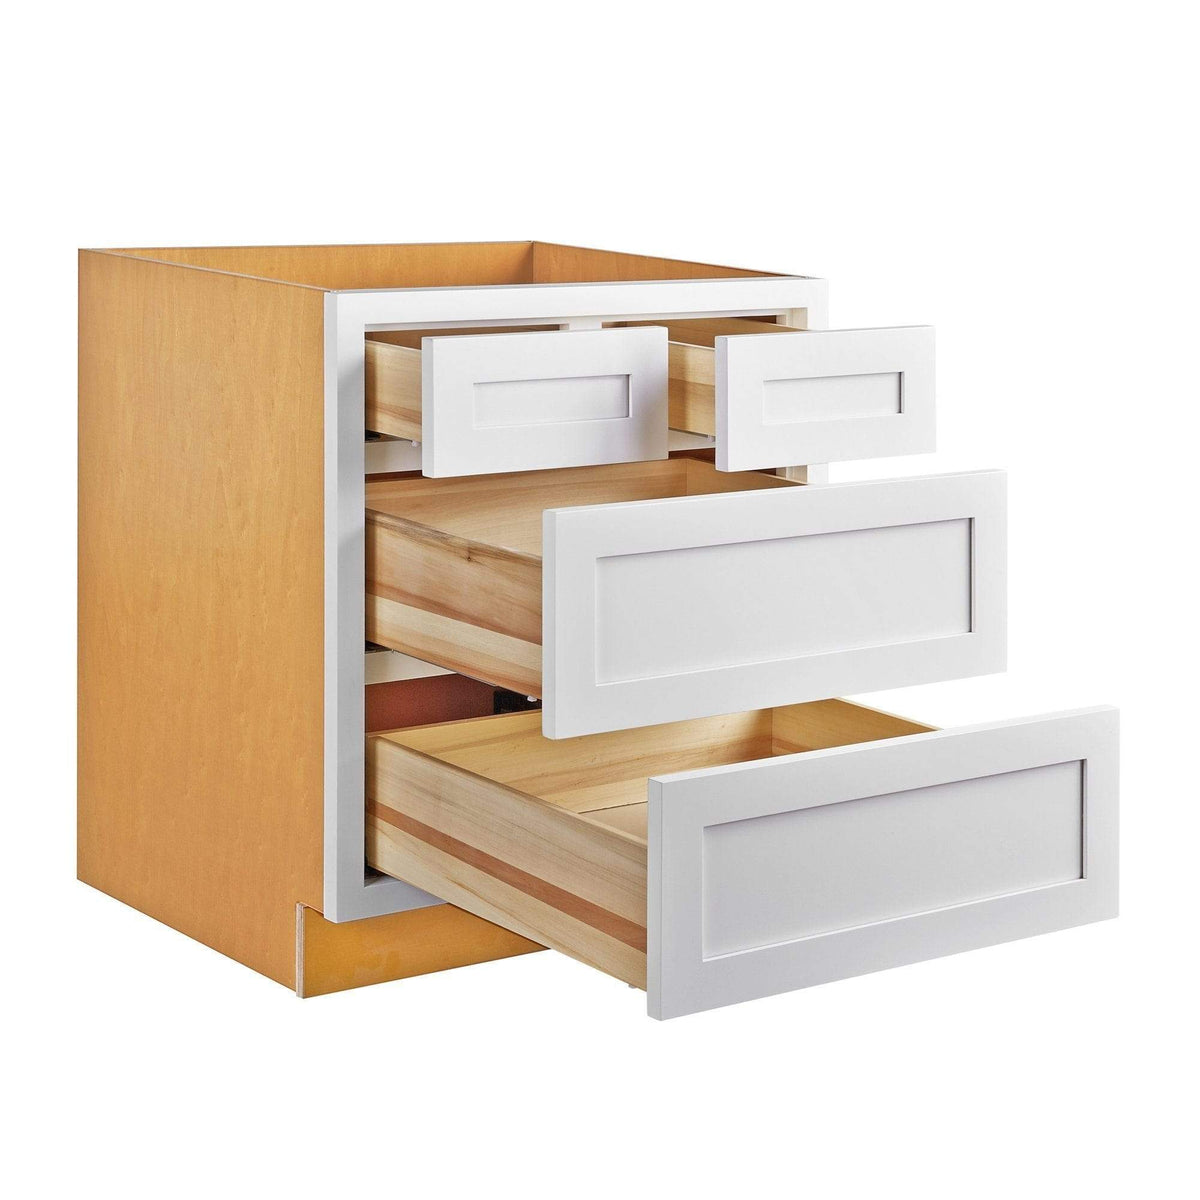 inset cabinet